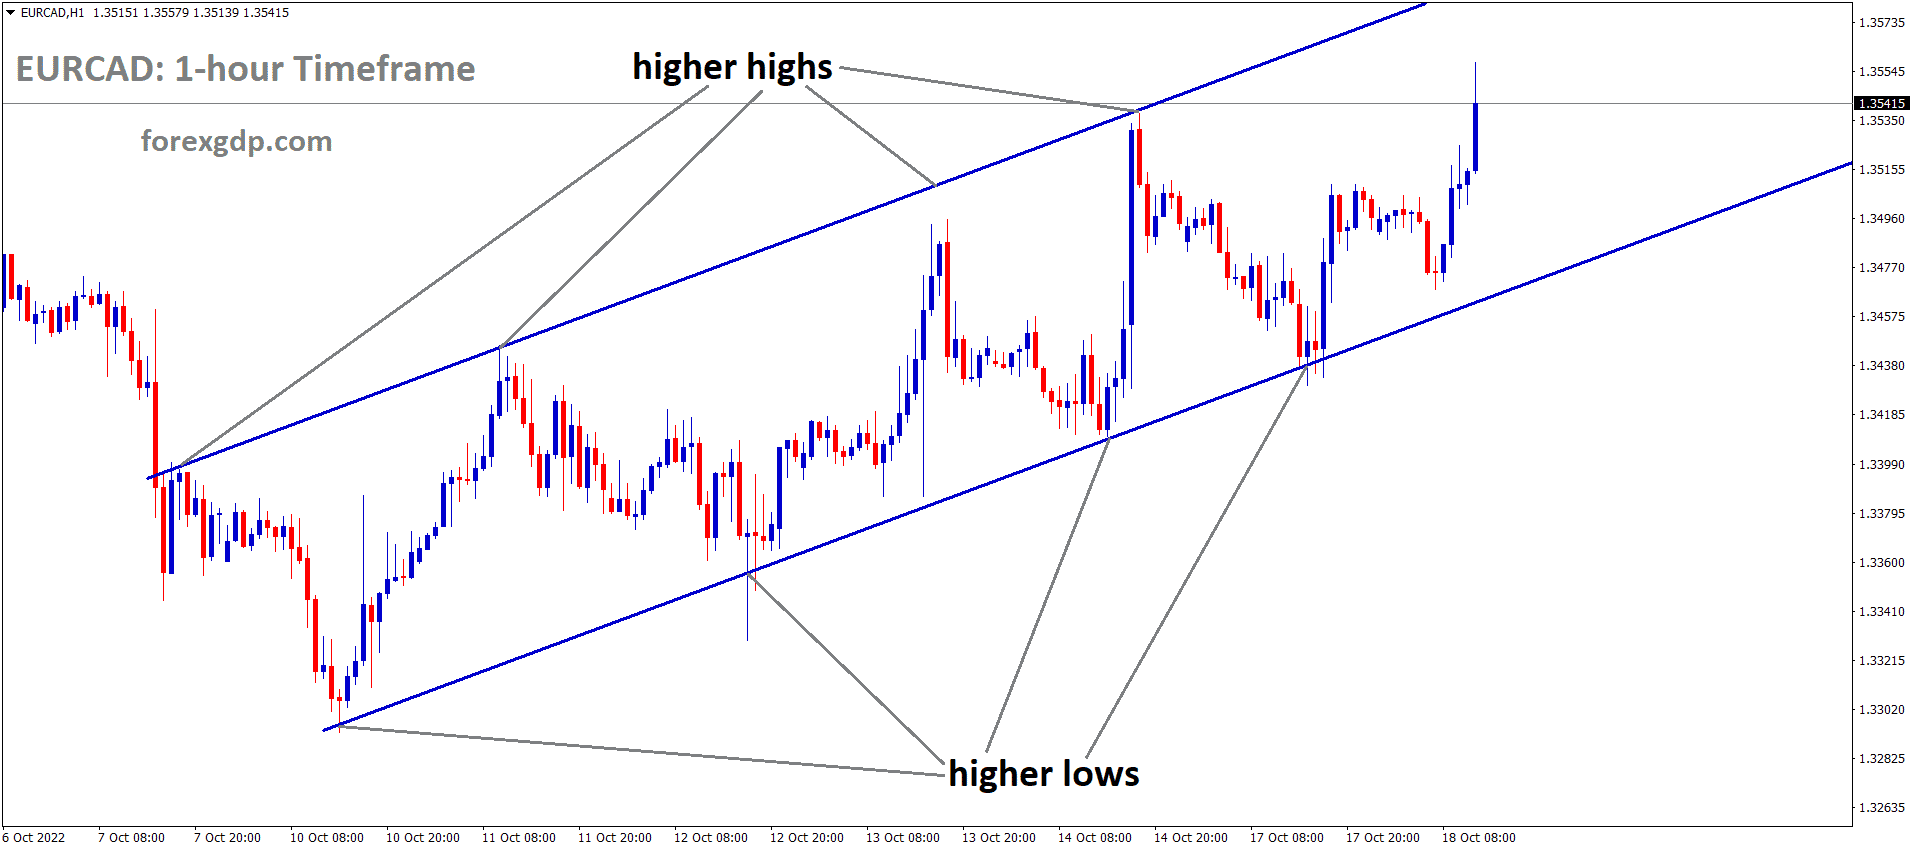 EURCAD is moving in an Ascending channel and the market has rebounded from the higher low area of the channel 2